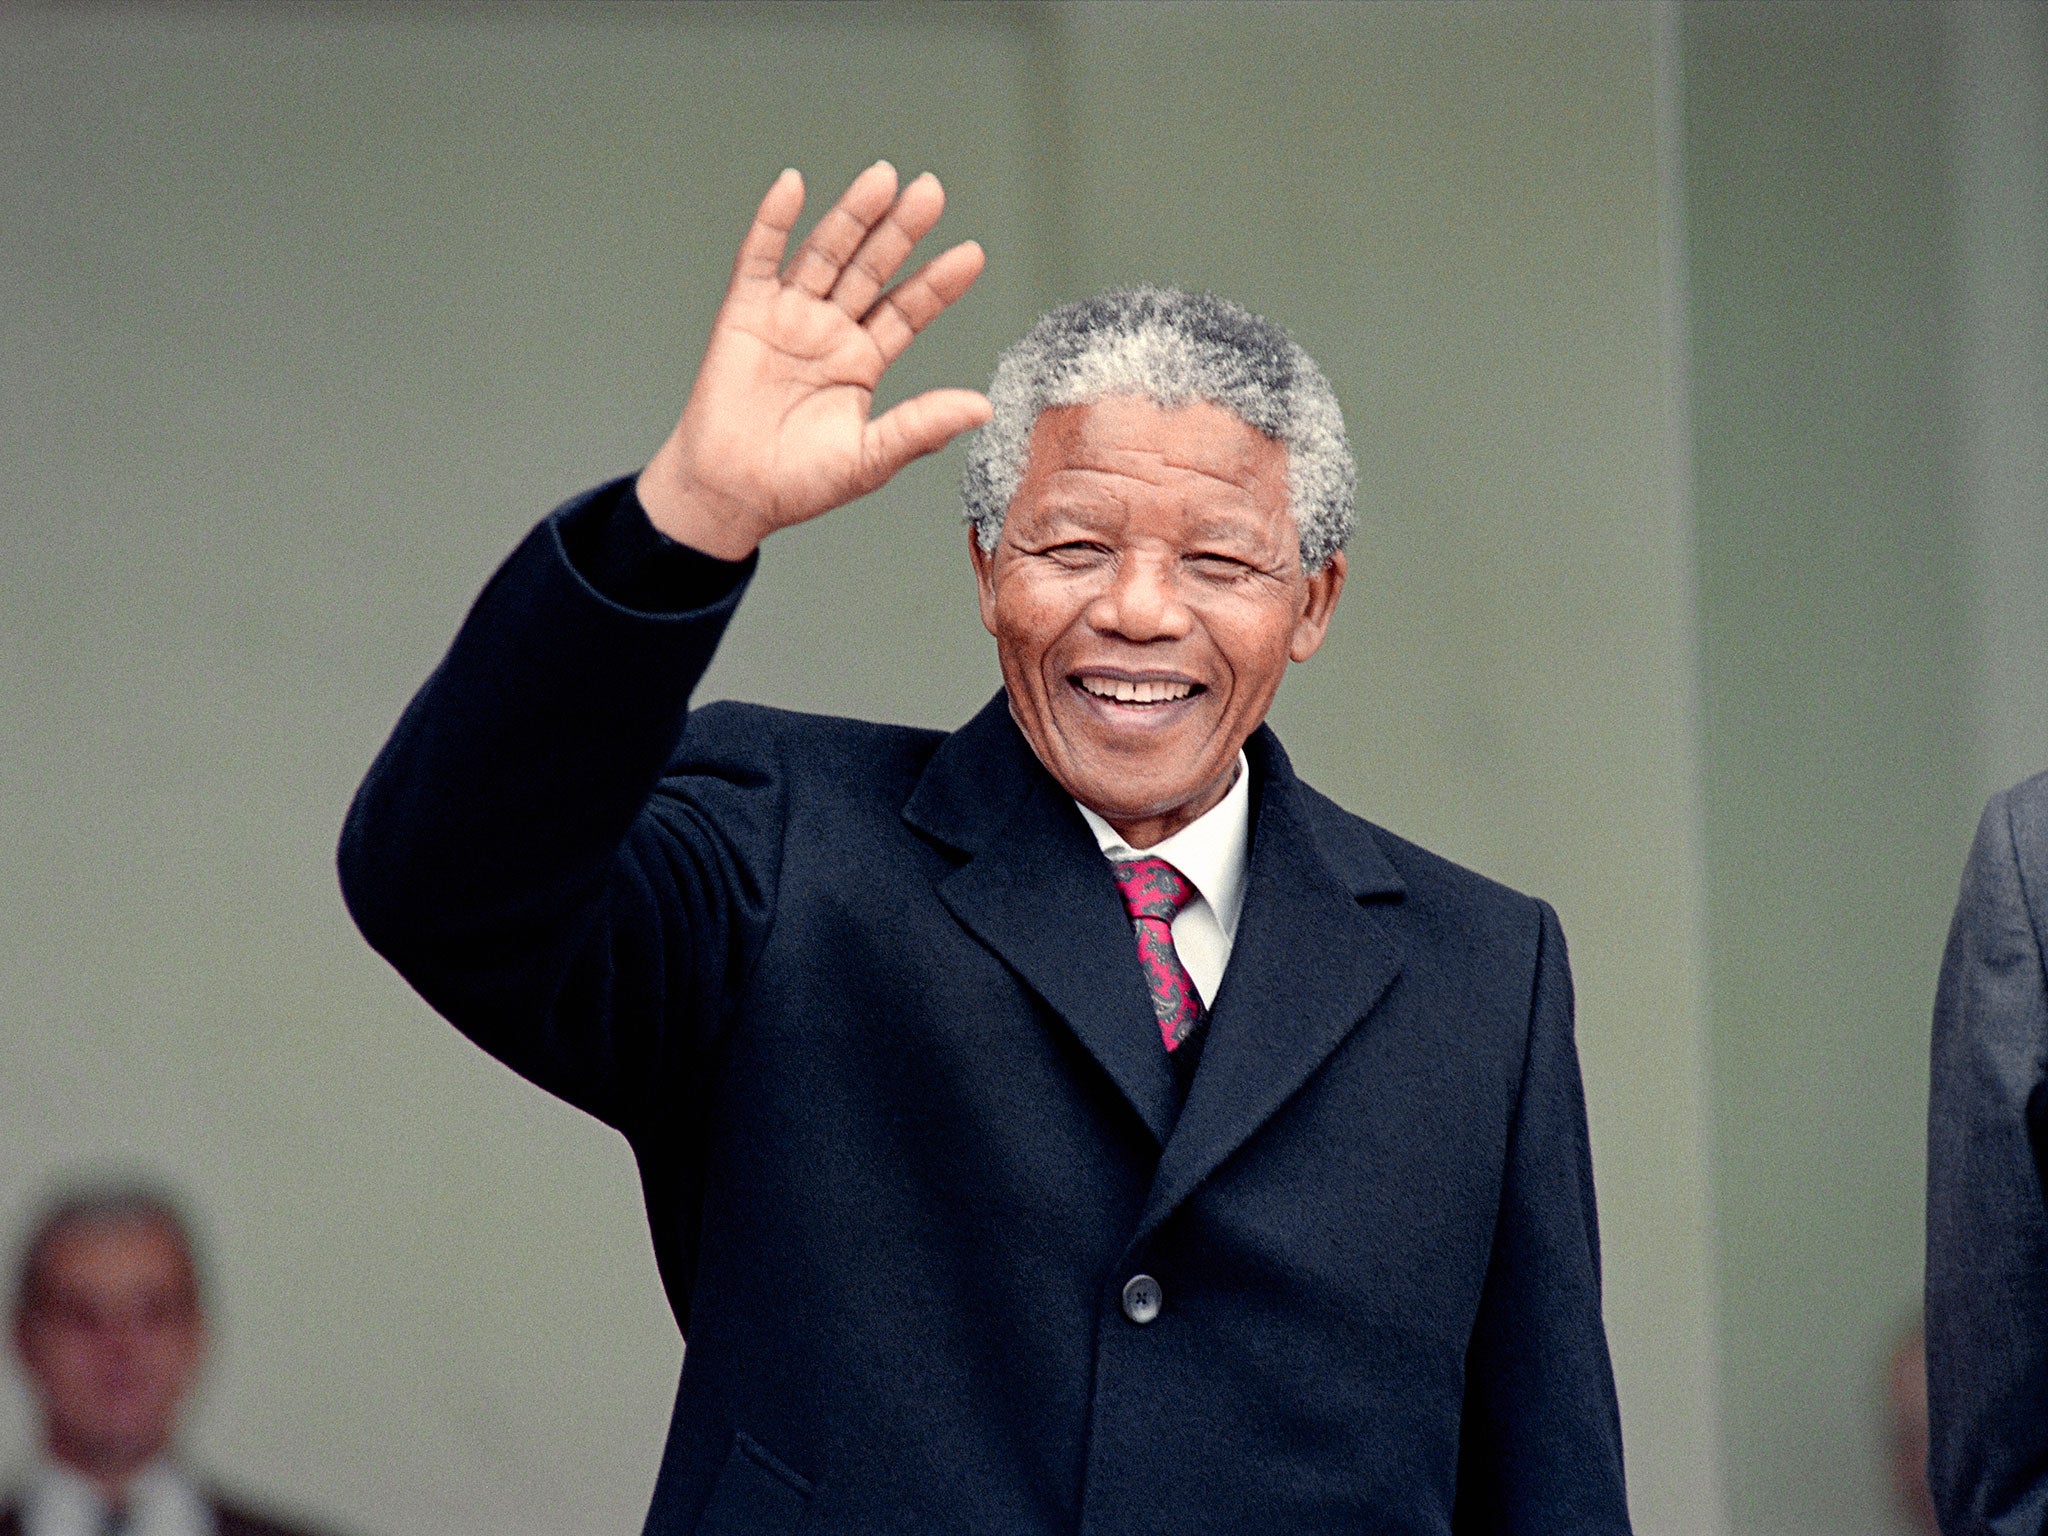 Mandela and the African National Congress were perfect examples of CIA's anti-Communist fixation